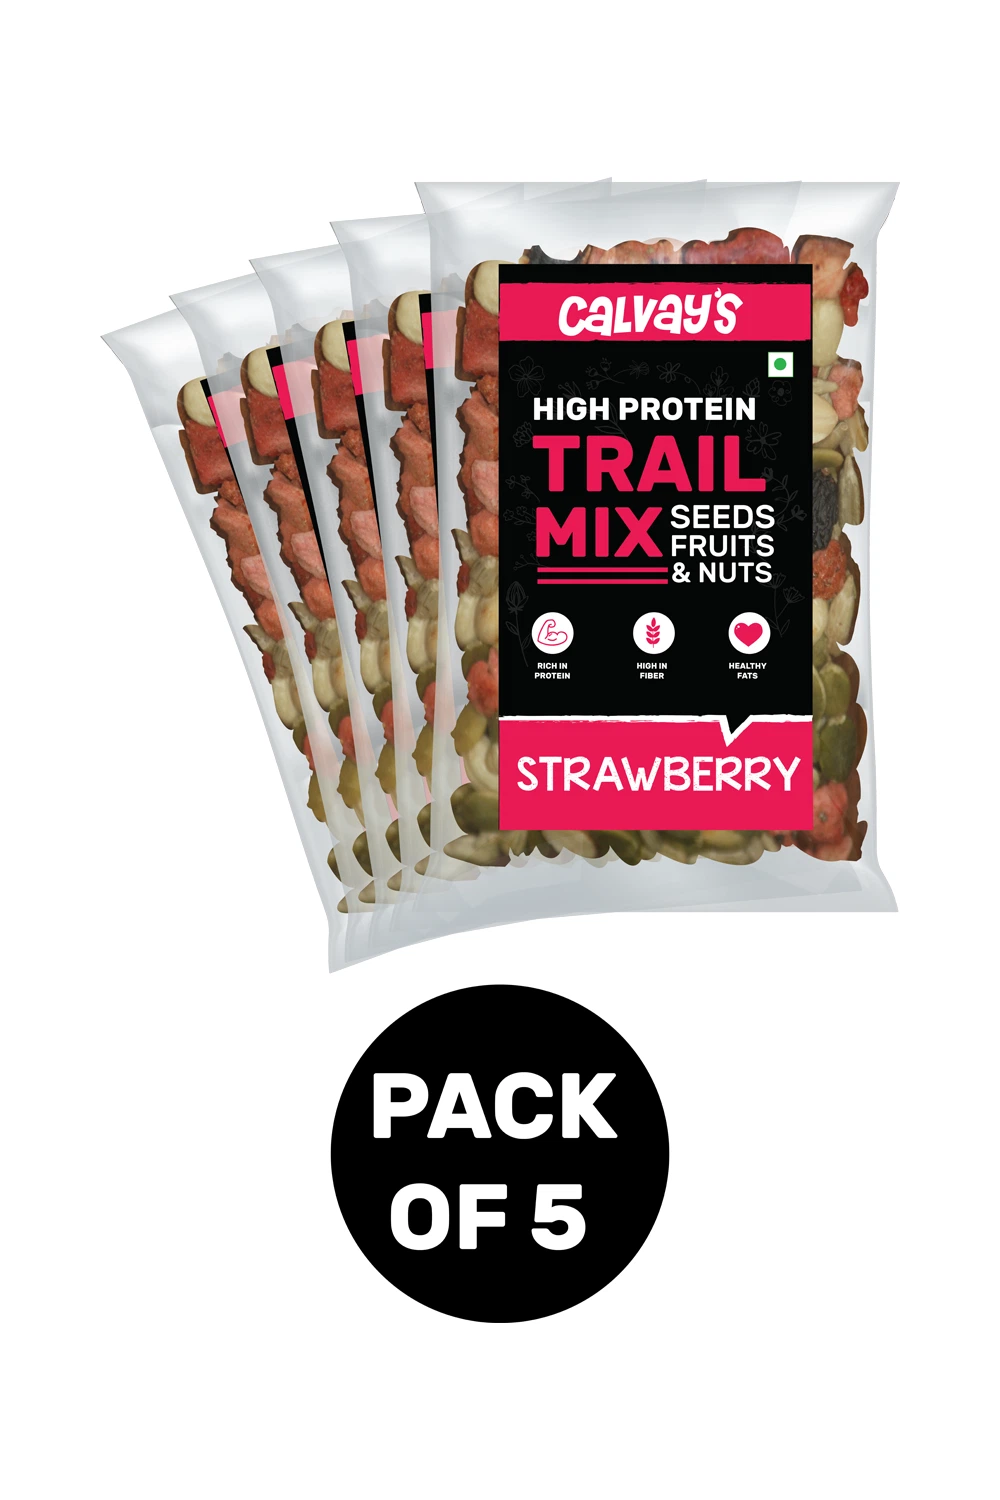 Calvay's High Protein Trail Mix - Strawberry- Pack of 5